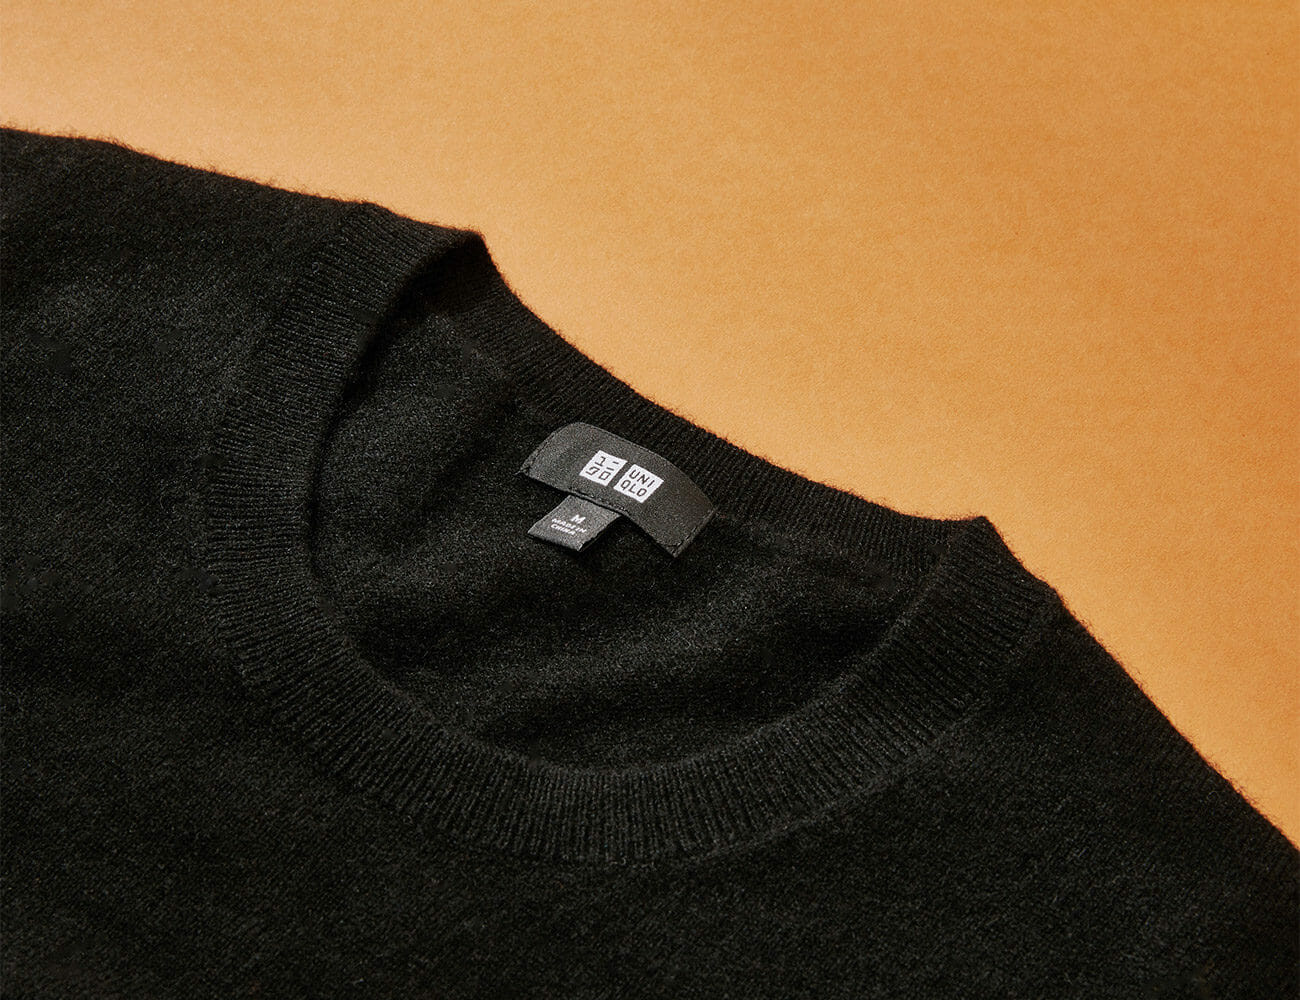 The-Best-Cashmere-Sweaters-for-100-or-Less-Gear-Patrol-Uniqlo-Slide-2